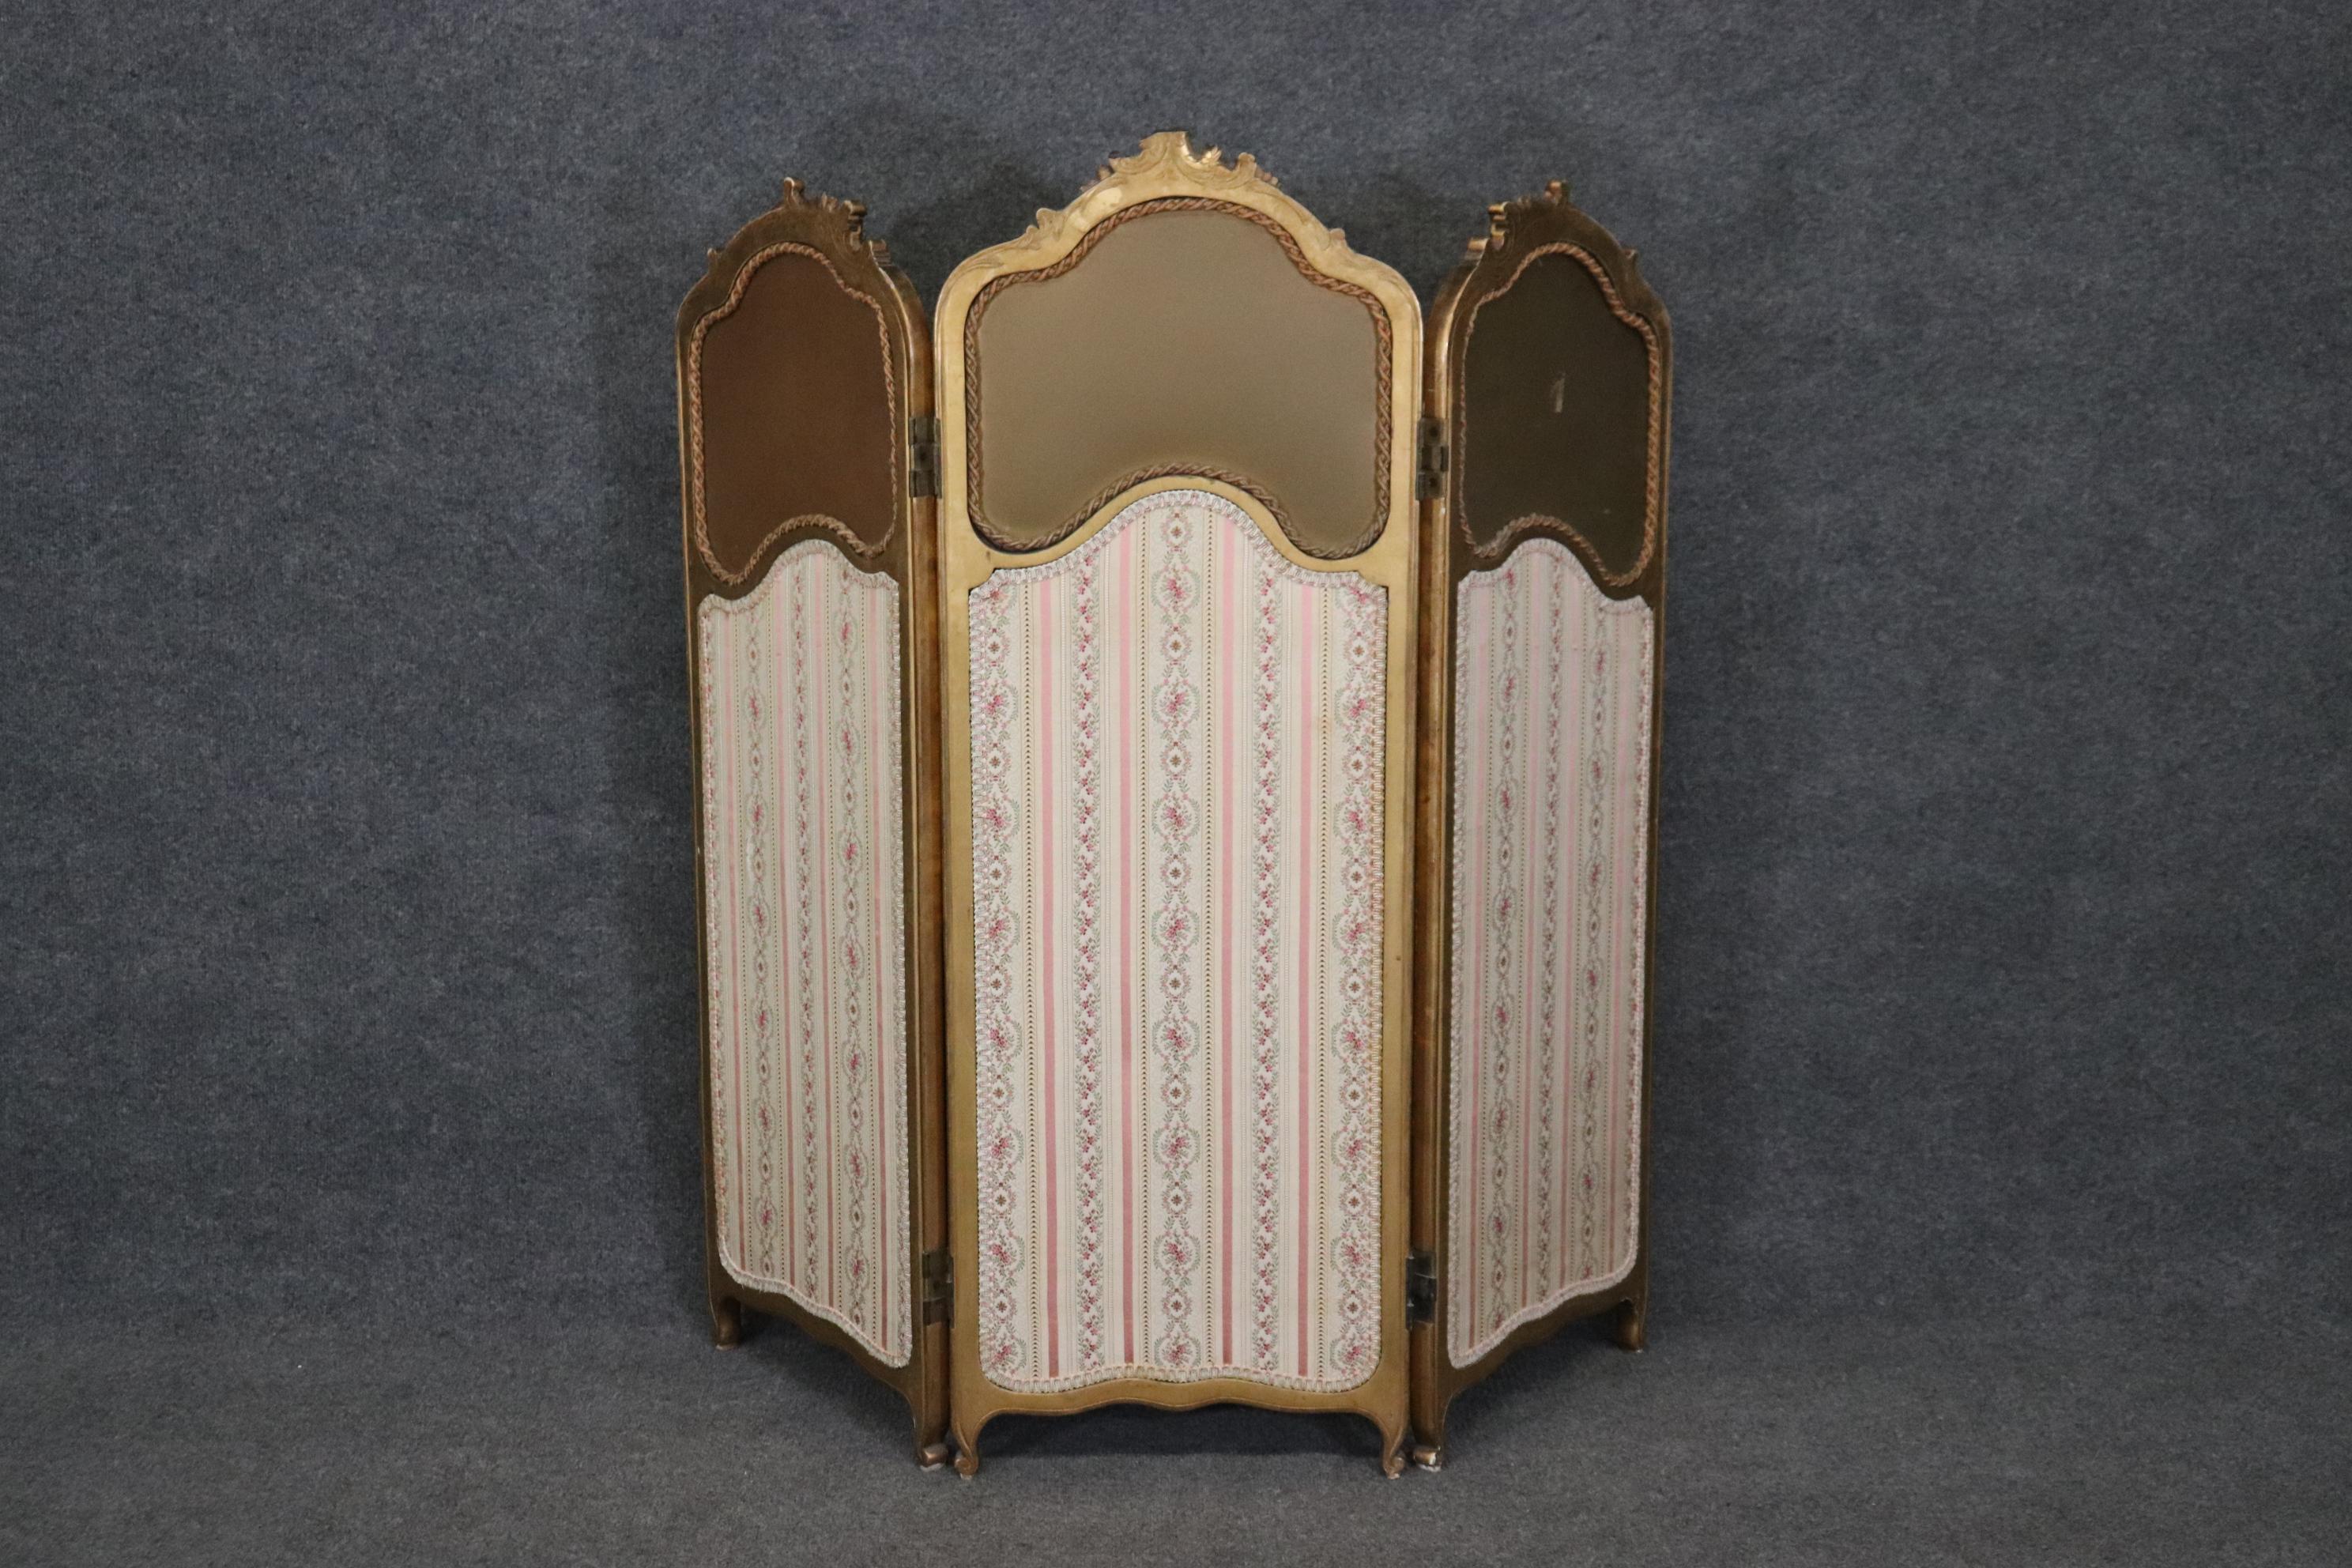 Dimensions:  H: 49 1/2in  W: 49 1/2in D: 1in to 16in

This 19th century Louis XV style 3 panel screen room divider is truly a beautiful piece! If you look at the photos provided, you will see the elaborate carved gilt frame holding upholstered